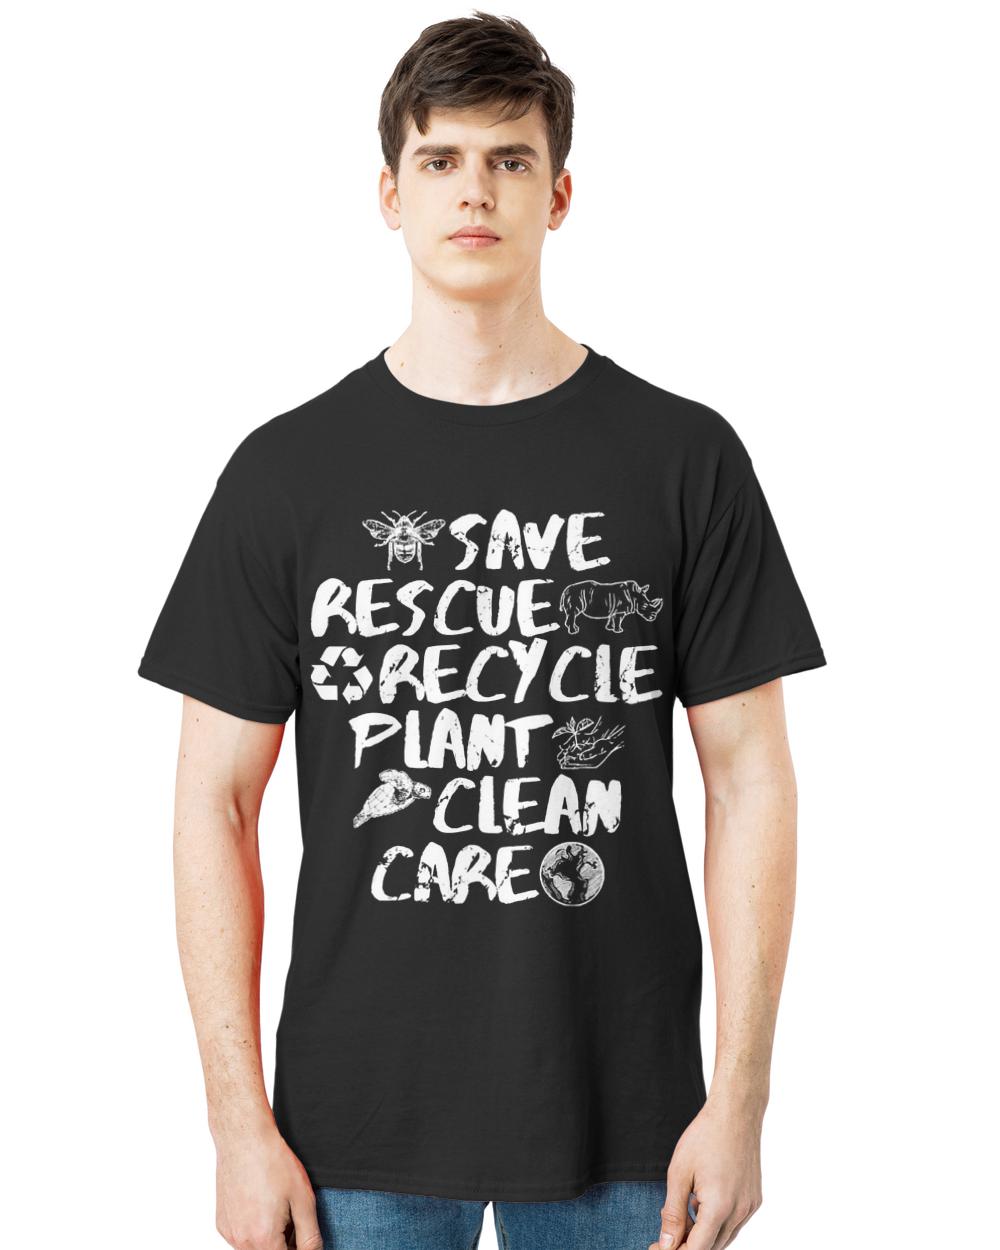 Global Warming T- Shirt Save rescue recycle plant clean care T- Shirt